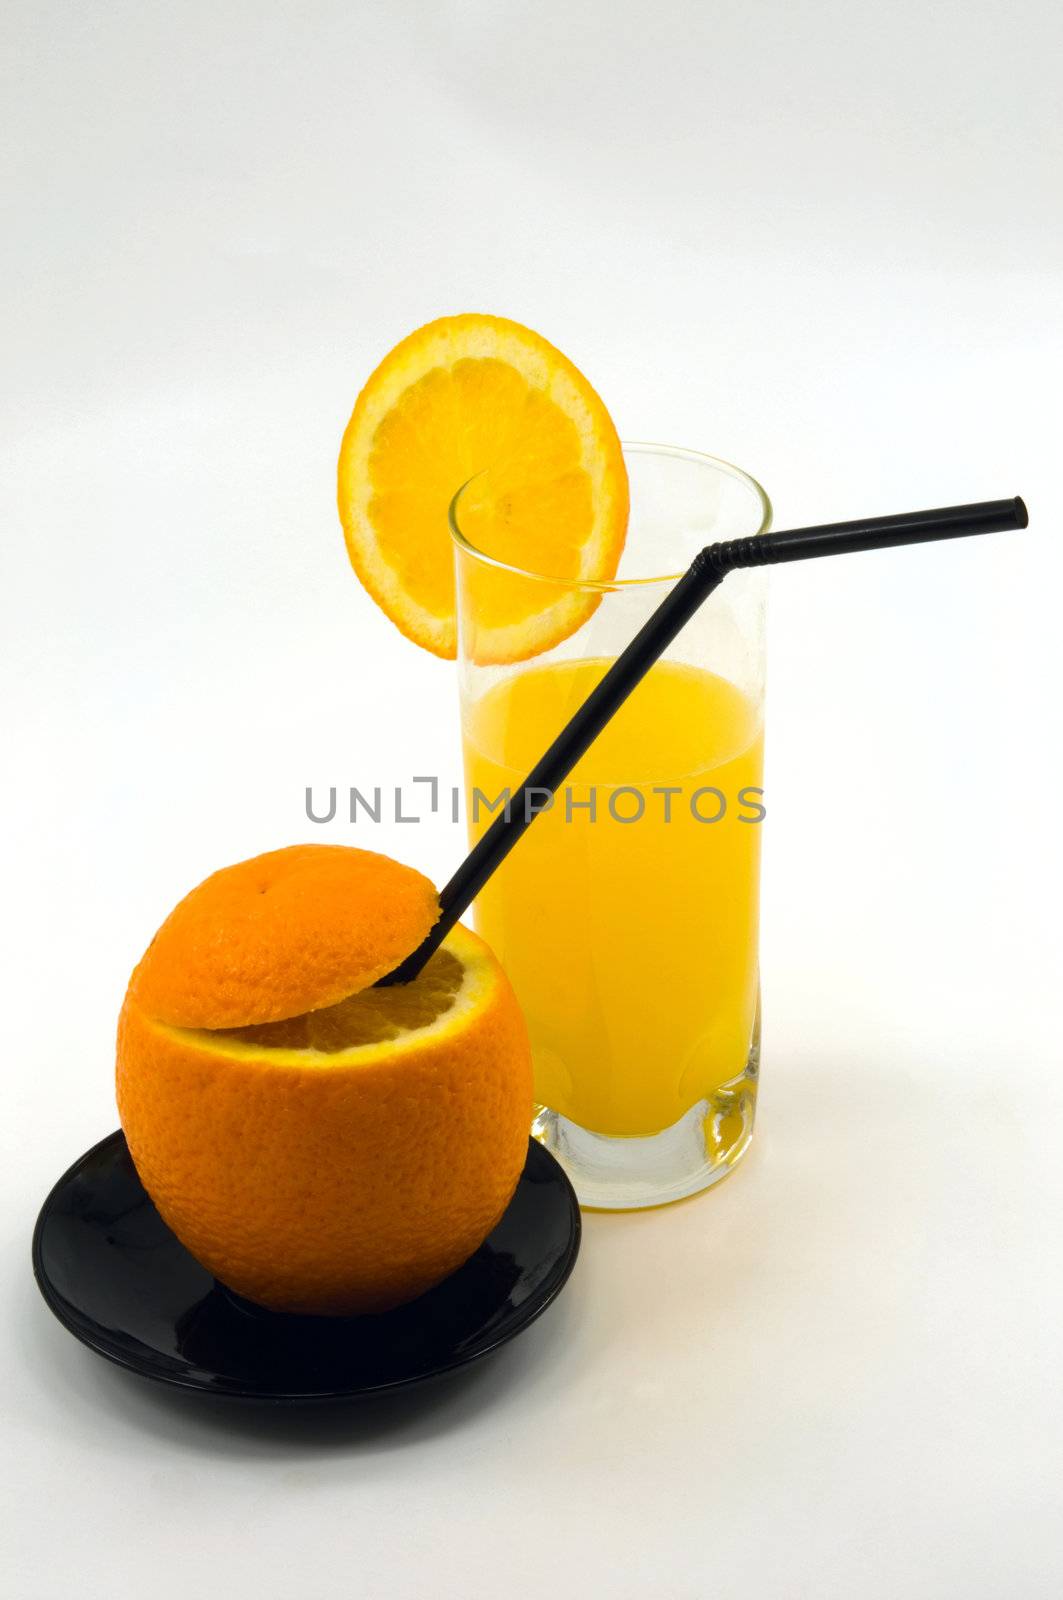 
	
The traditional orange juice and cut an orange in the plates